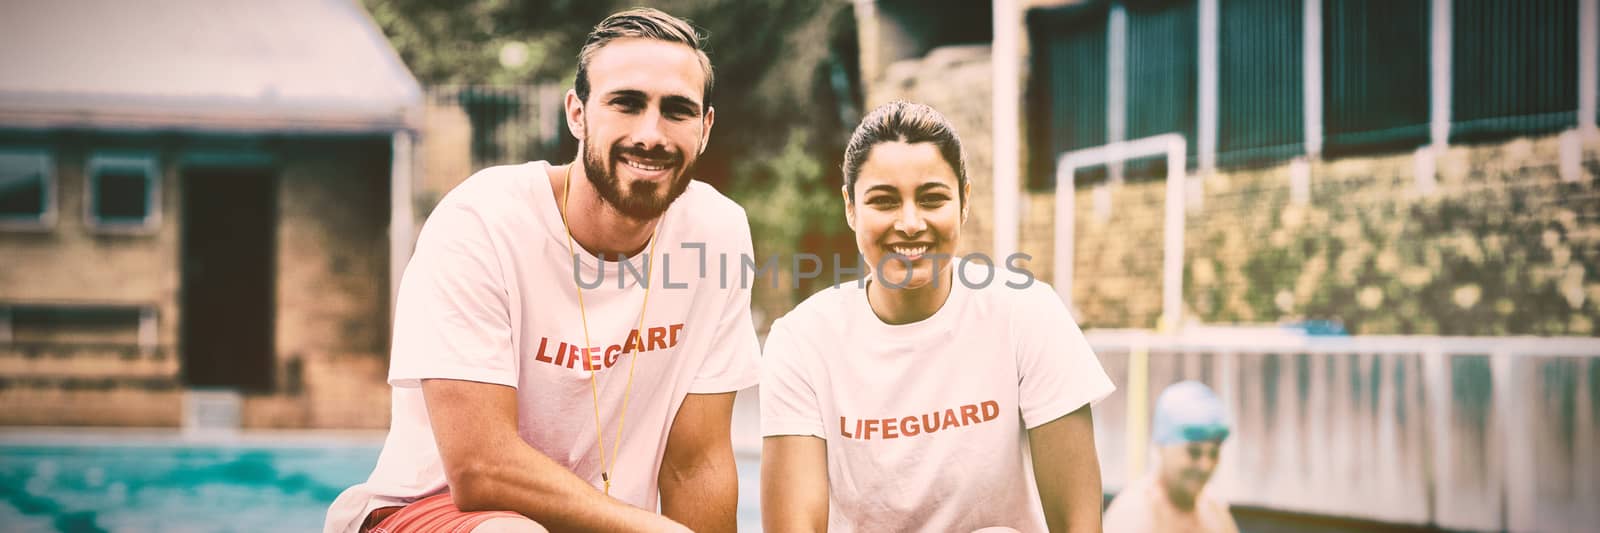 Male and female lifeguards holding rescue cans at poolside by Wavebreakmedia